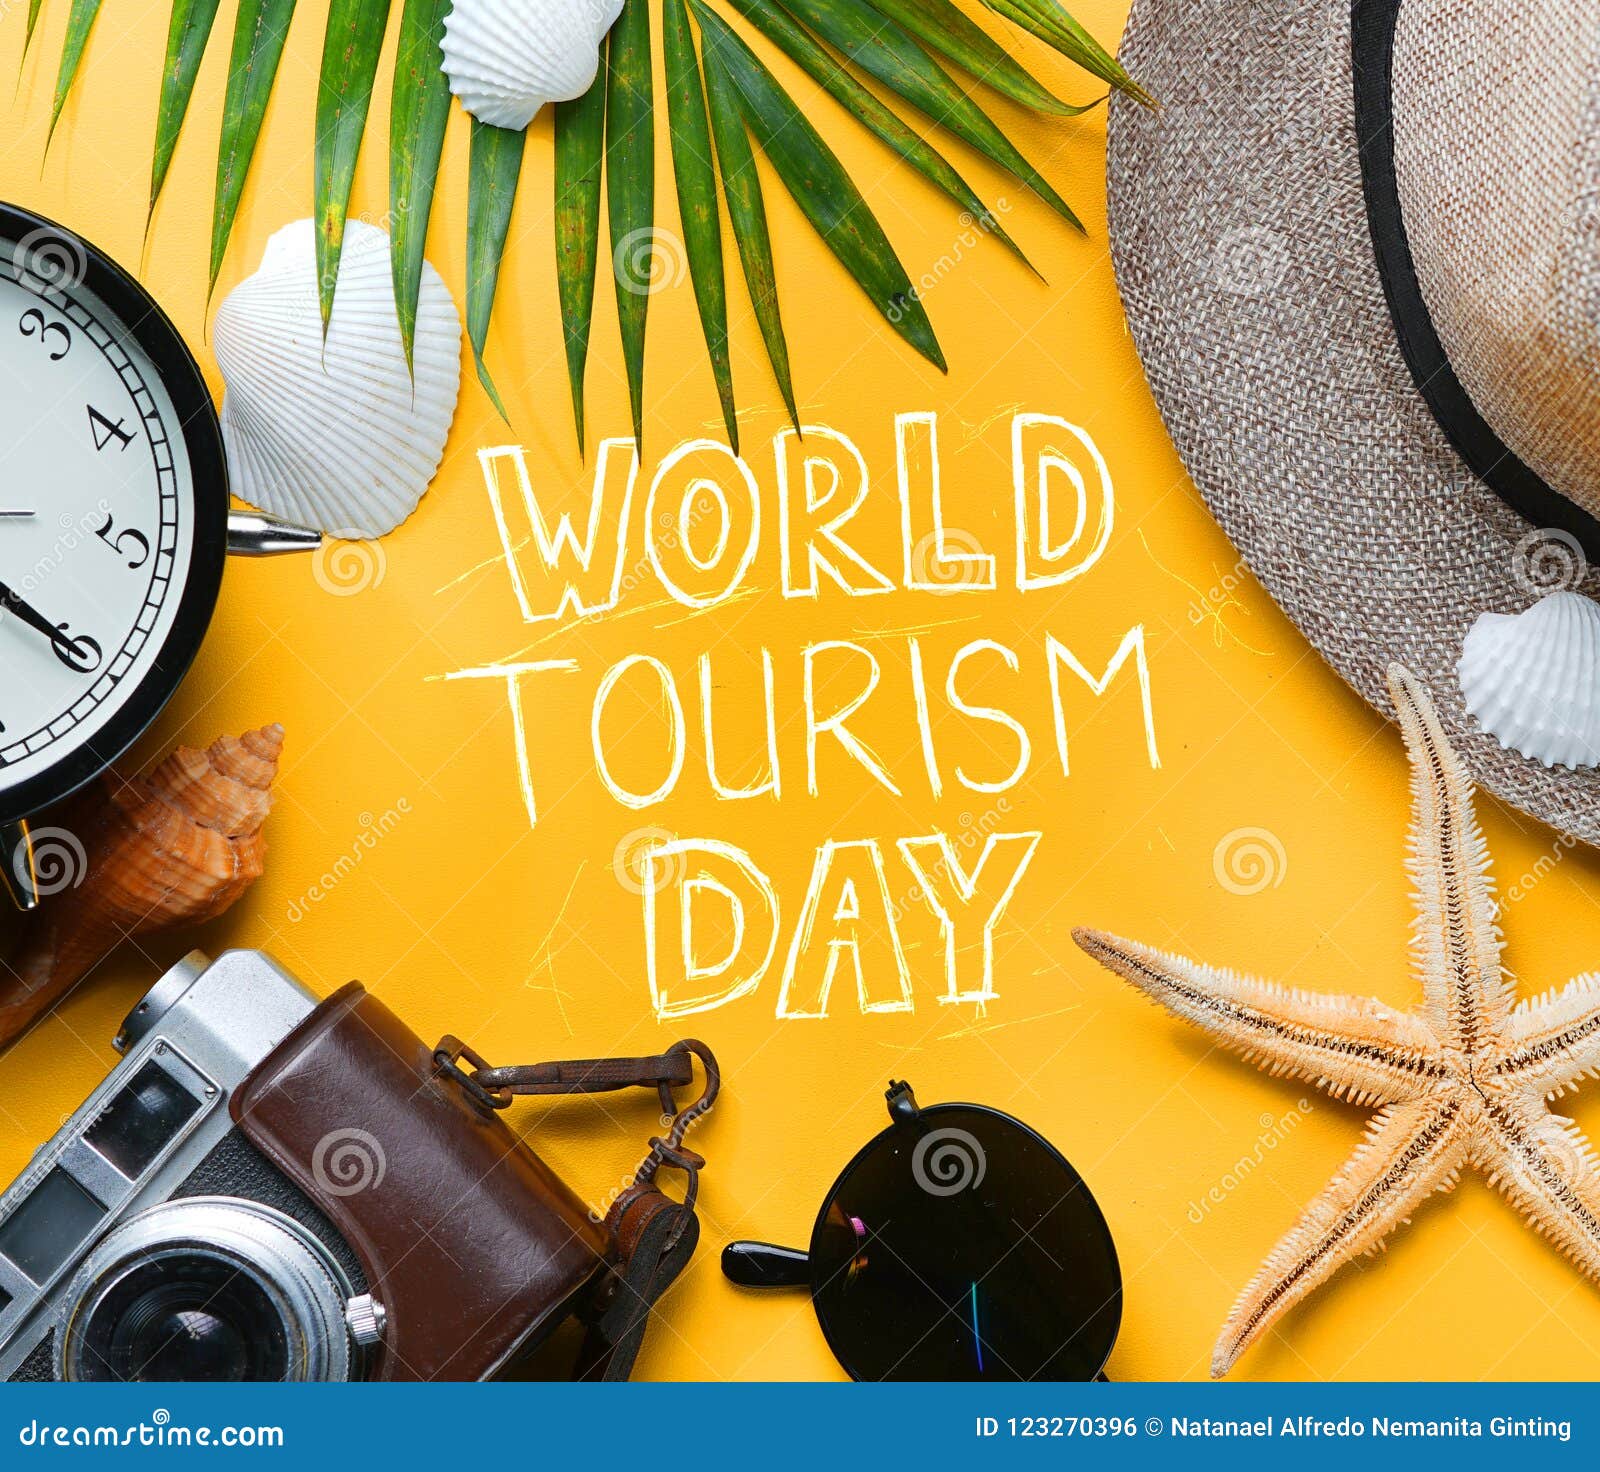 world tourism day typography. flat lay traveling holiday vacation yellow background